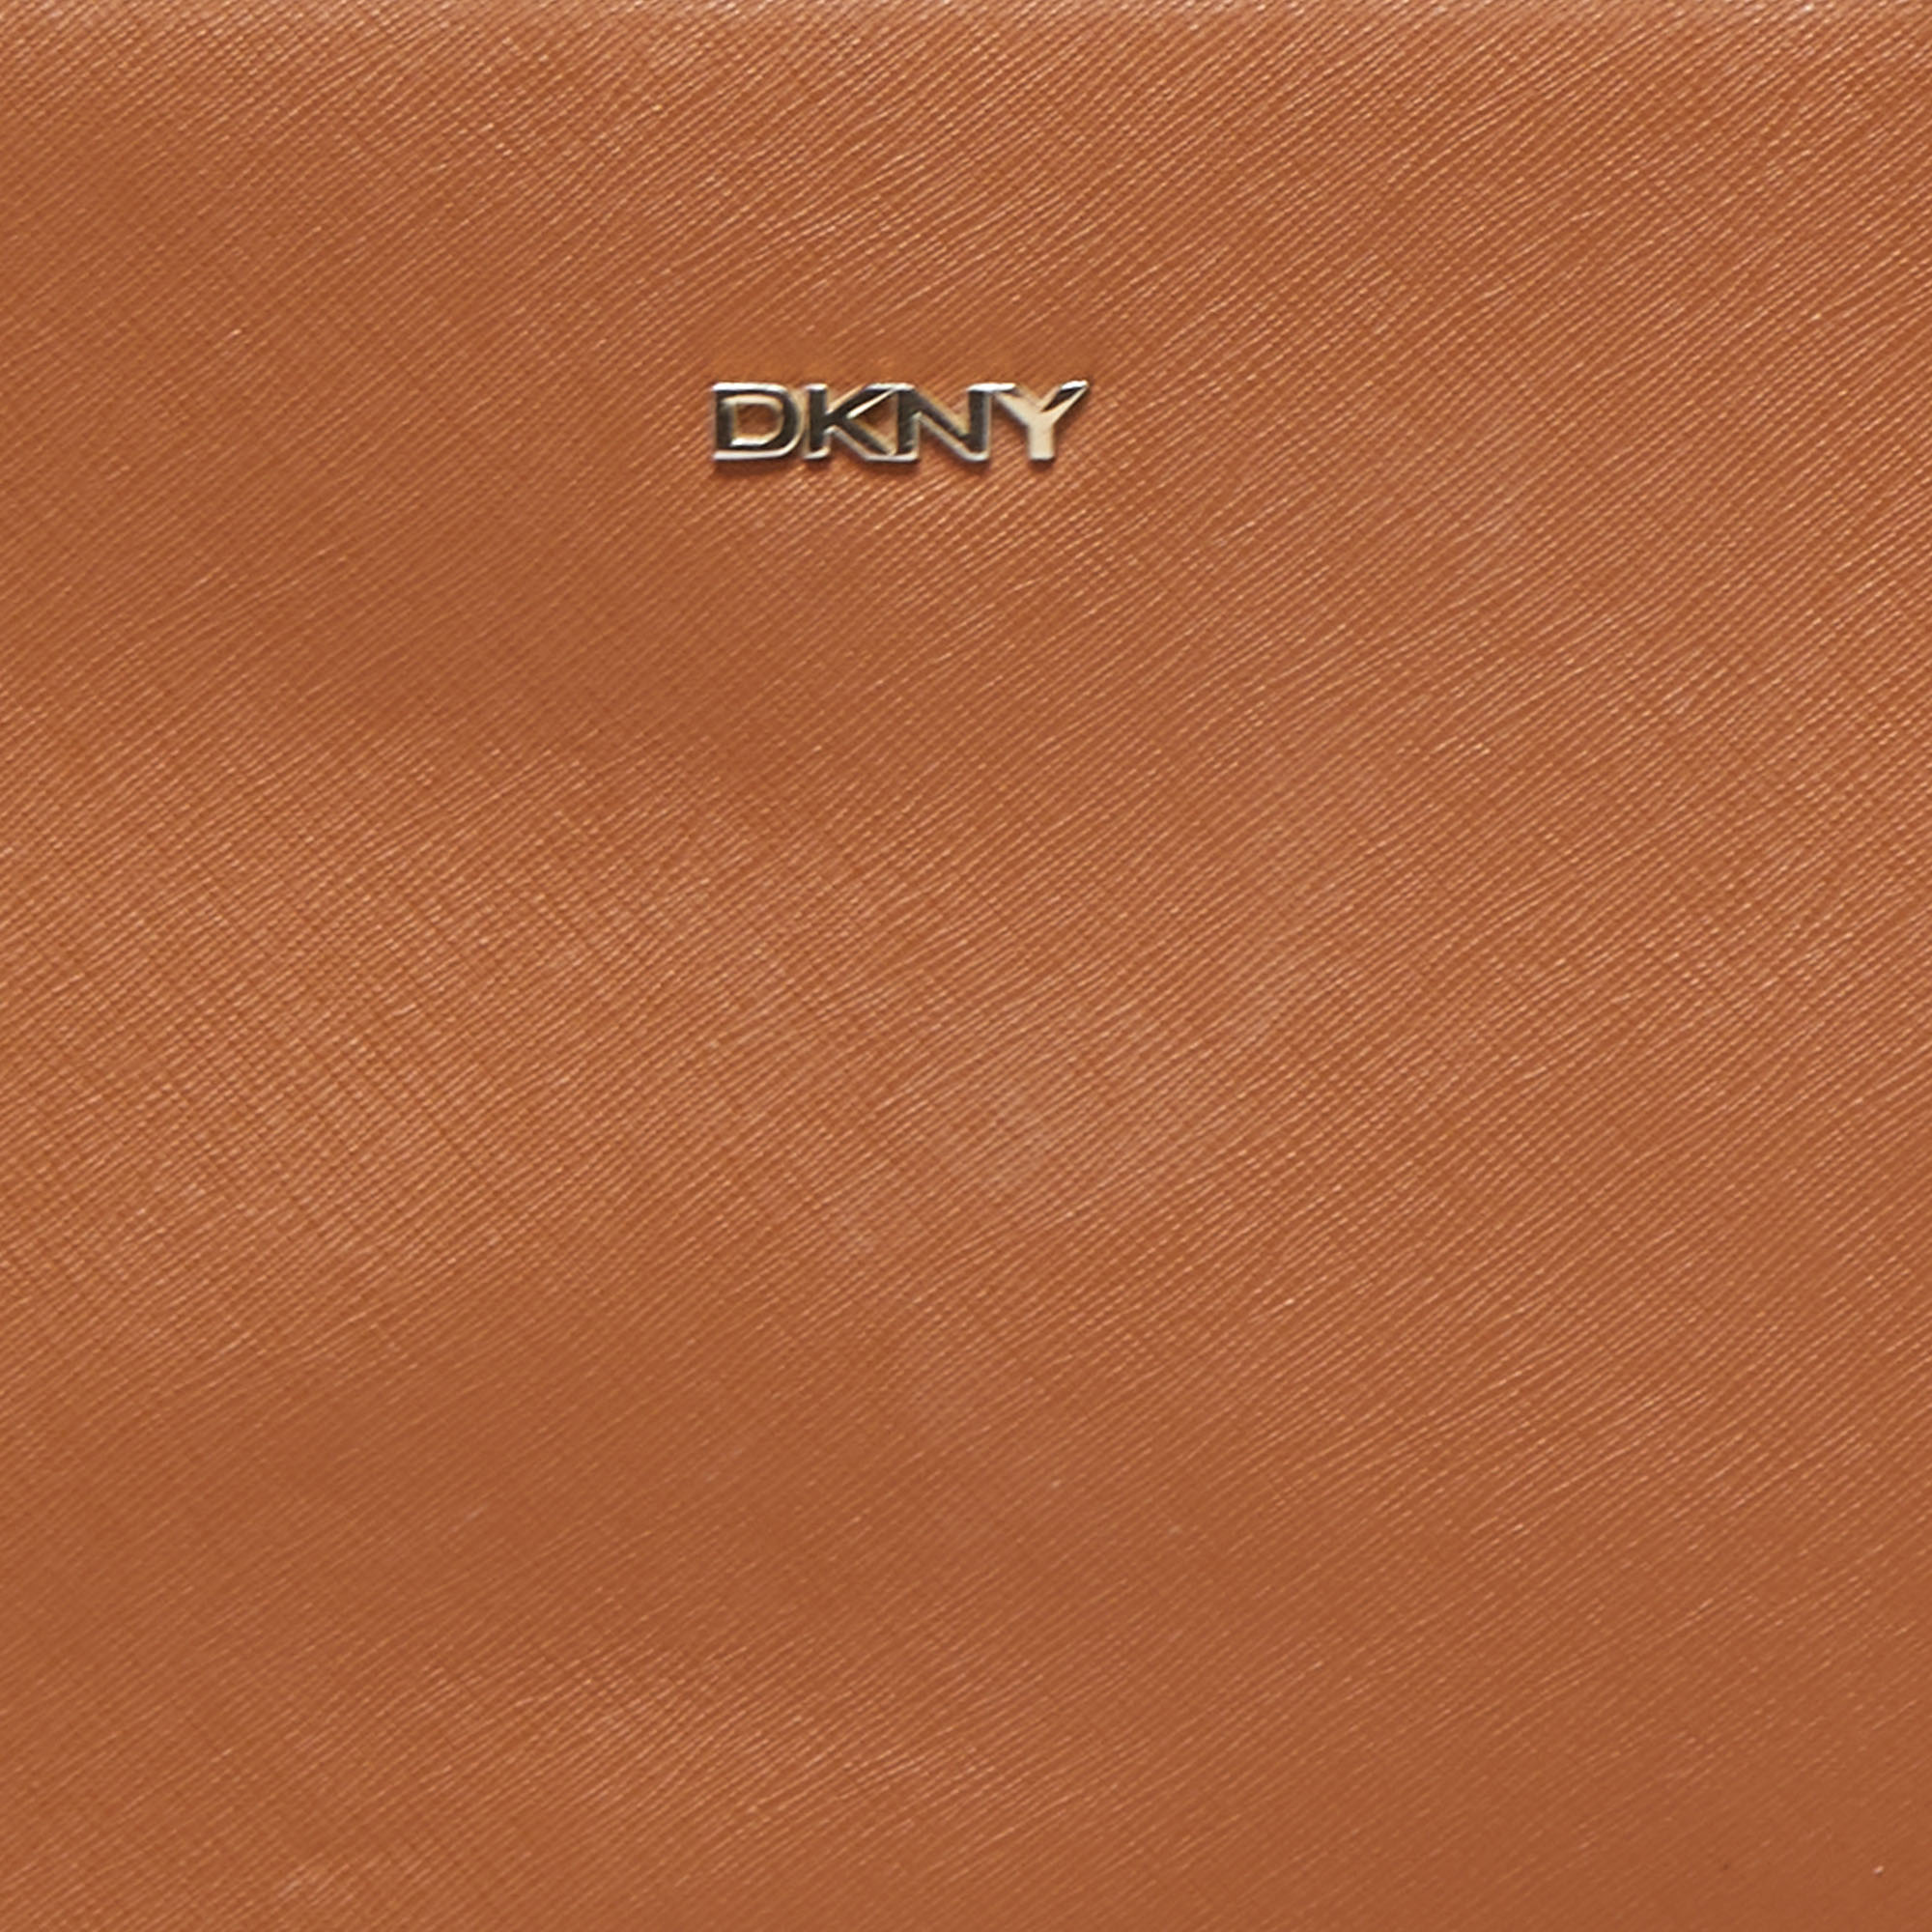 Dkny Brown Saffiano Leather Bryant Park Tote